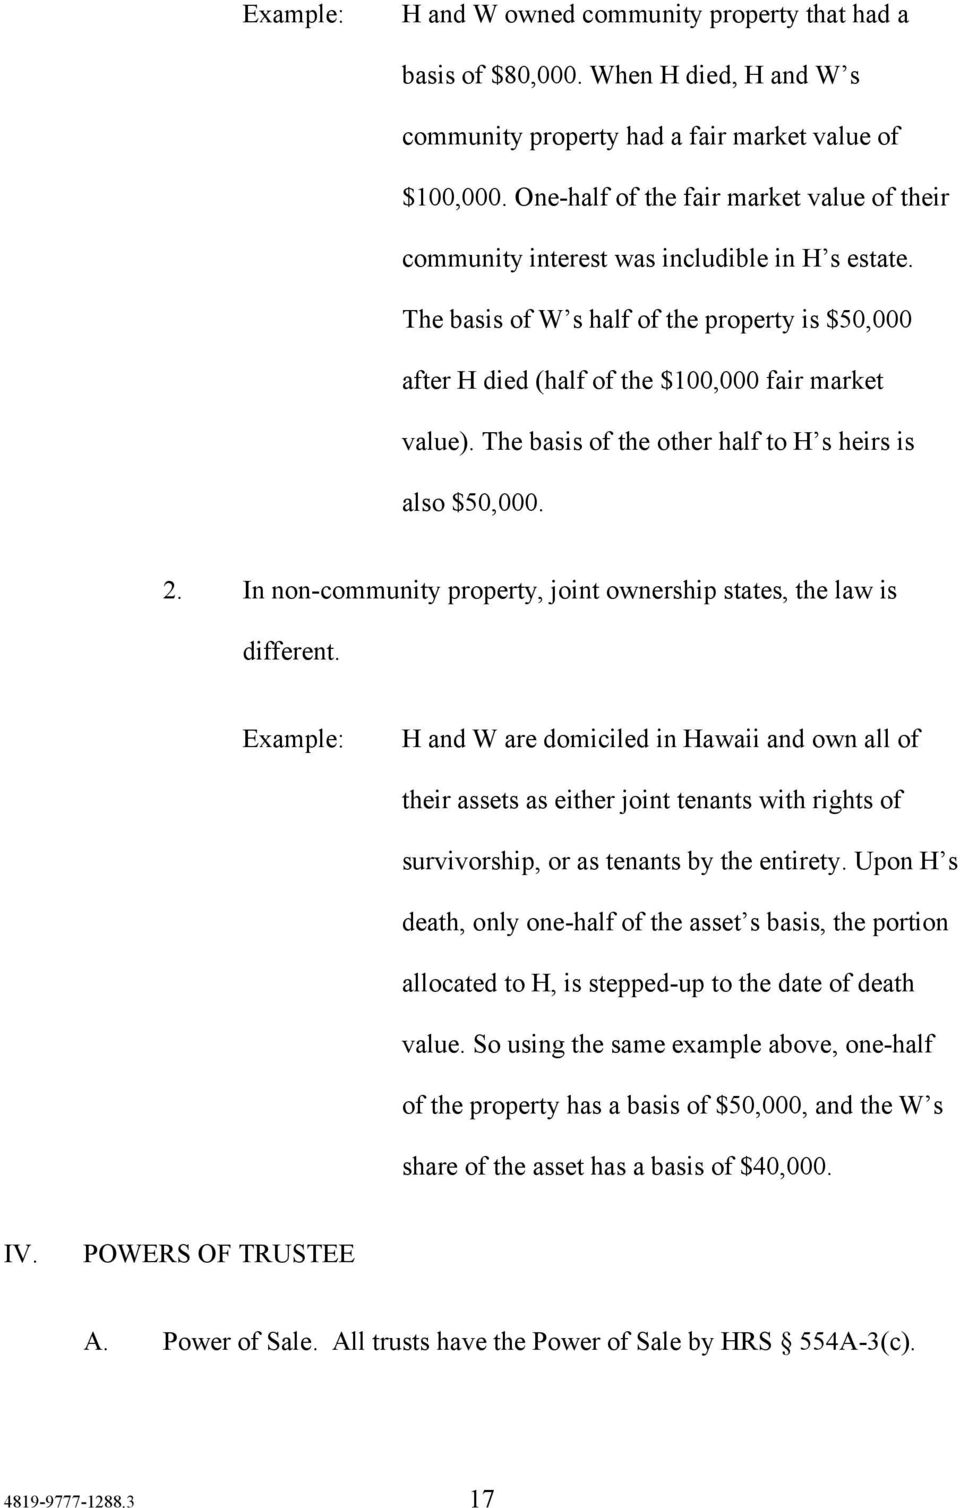 The basis of the other half to H s heirs is also $50,000. 2. In non-community property, joint ownership states, the law is different.